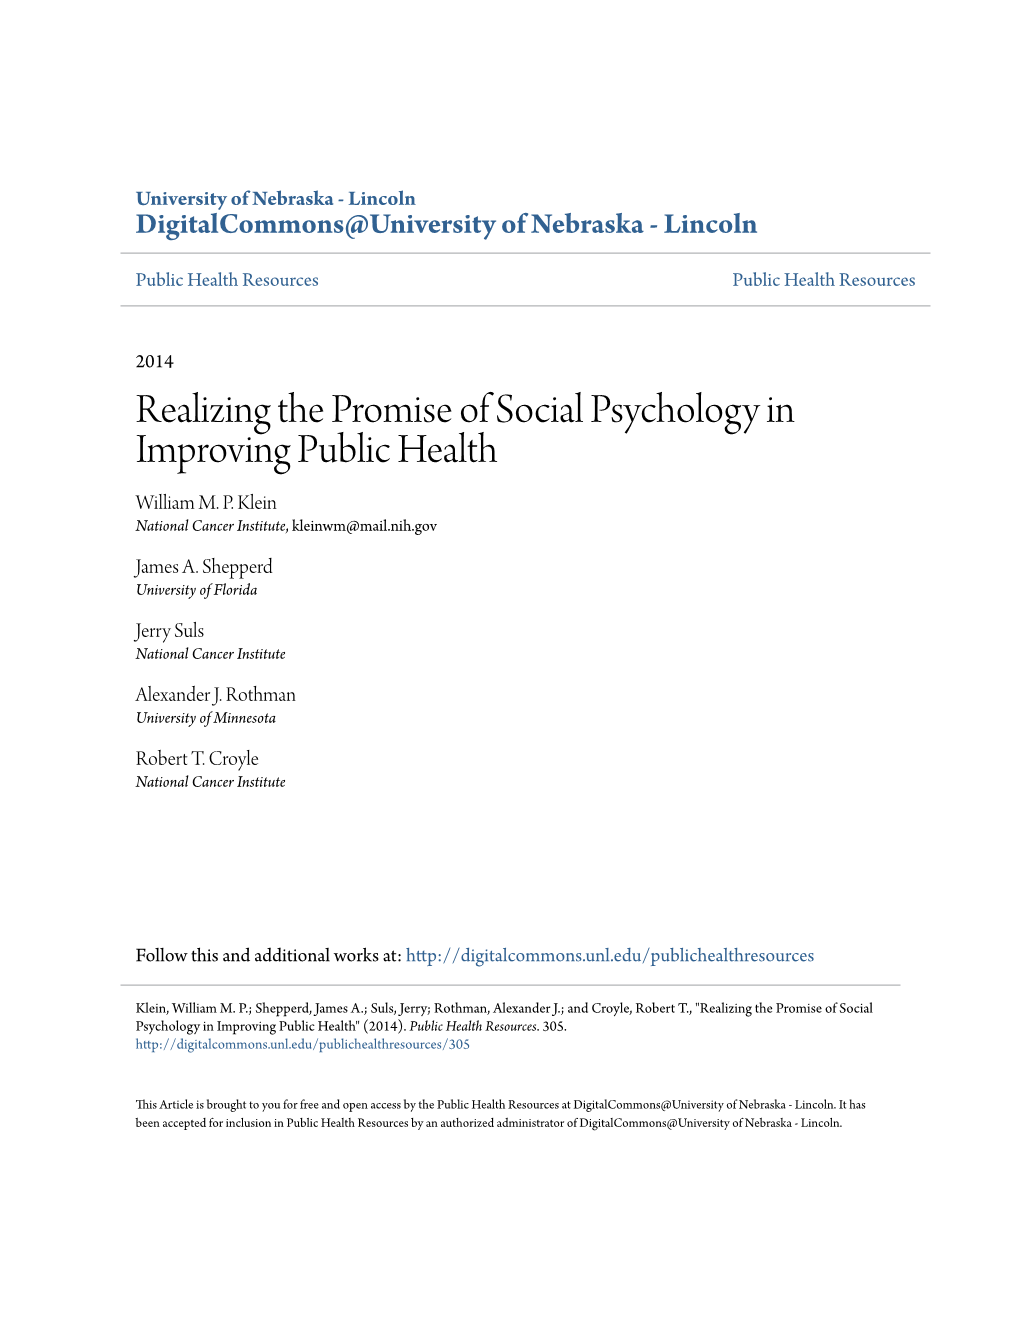 Realizing the Promise of Social Psychology in Improving Public Health William M